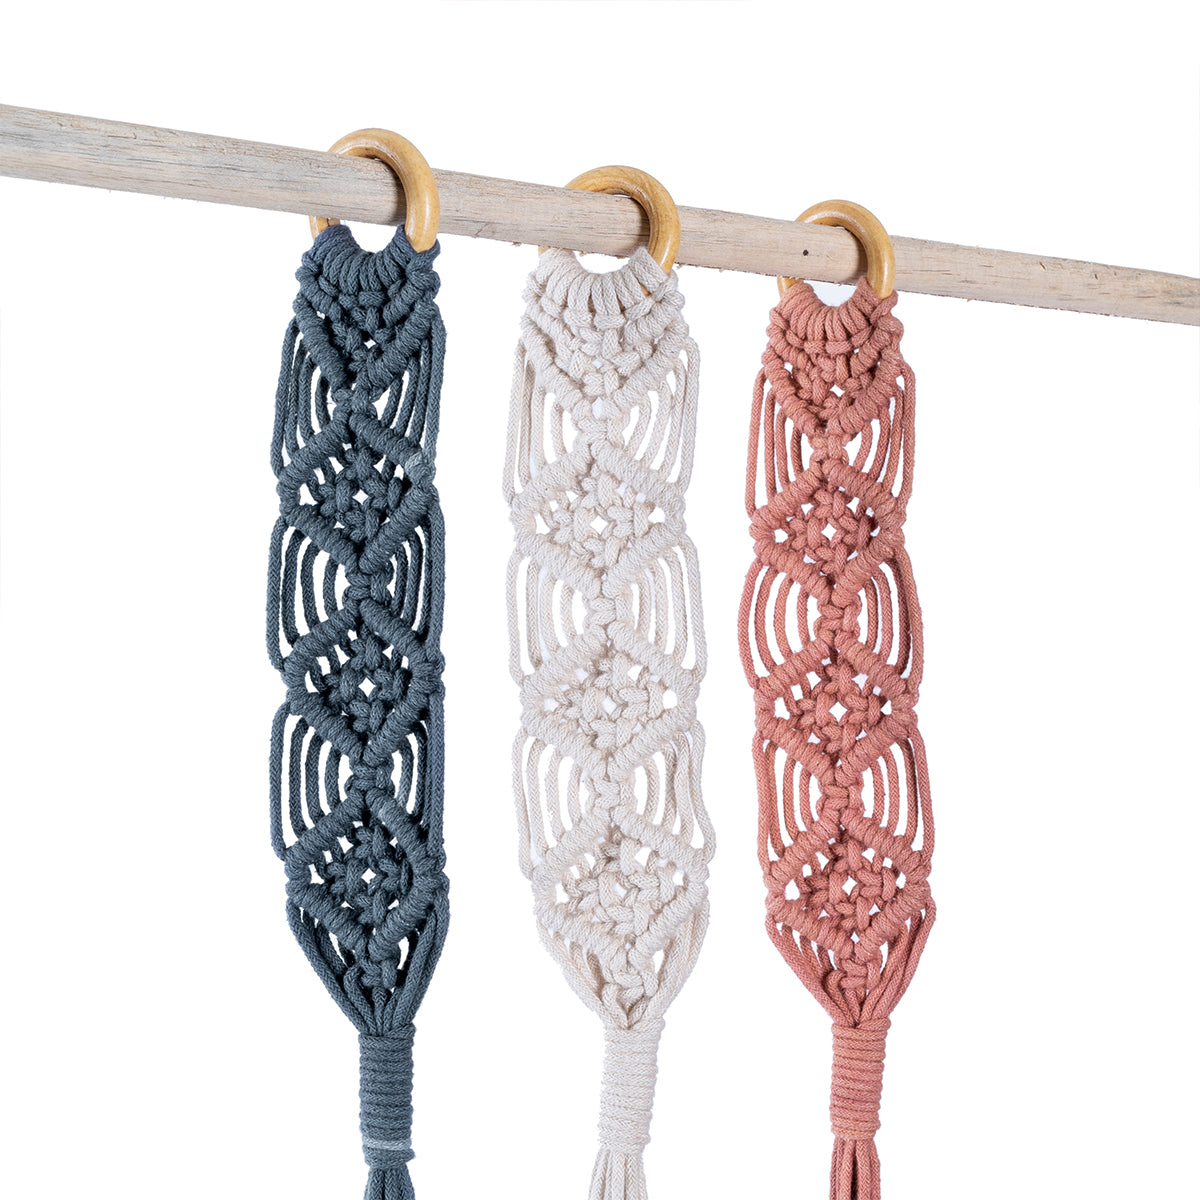 Interlaced Hand-Knotted Curtain Tie-back